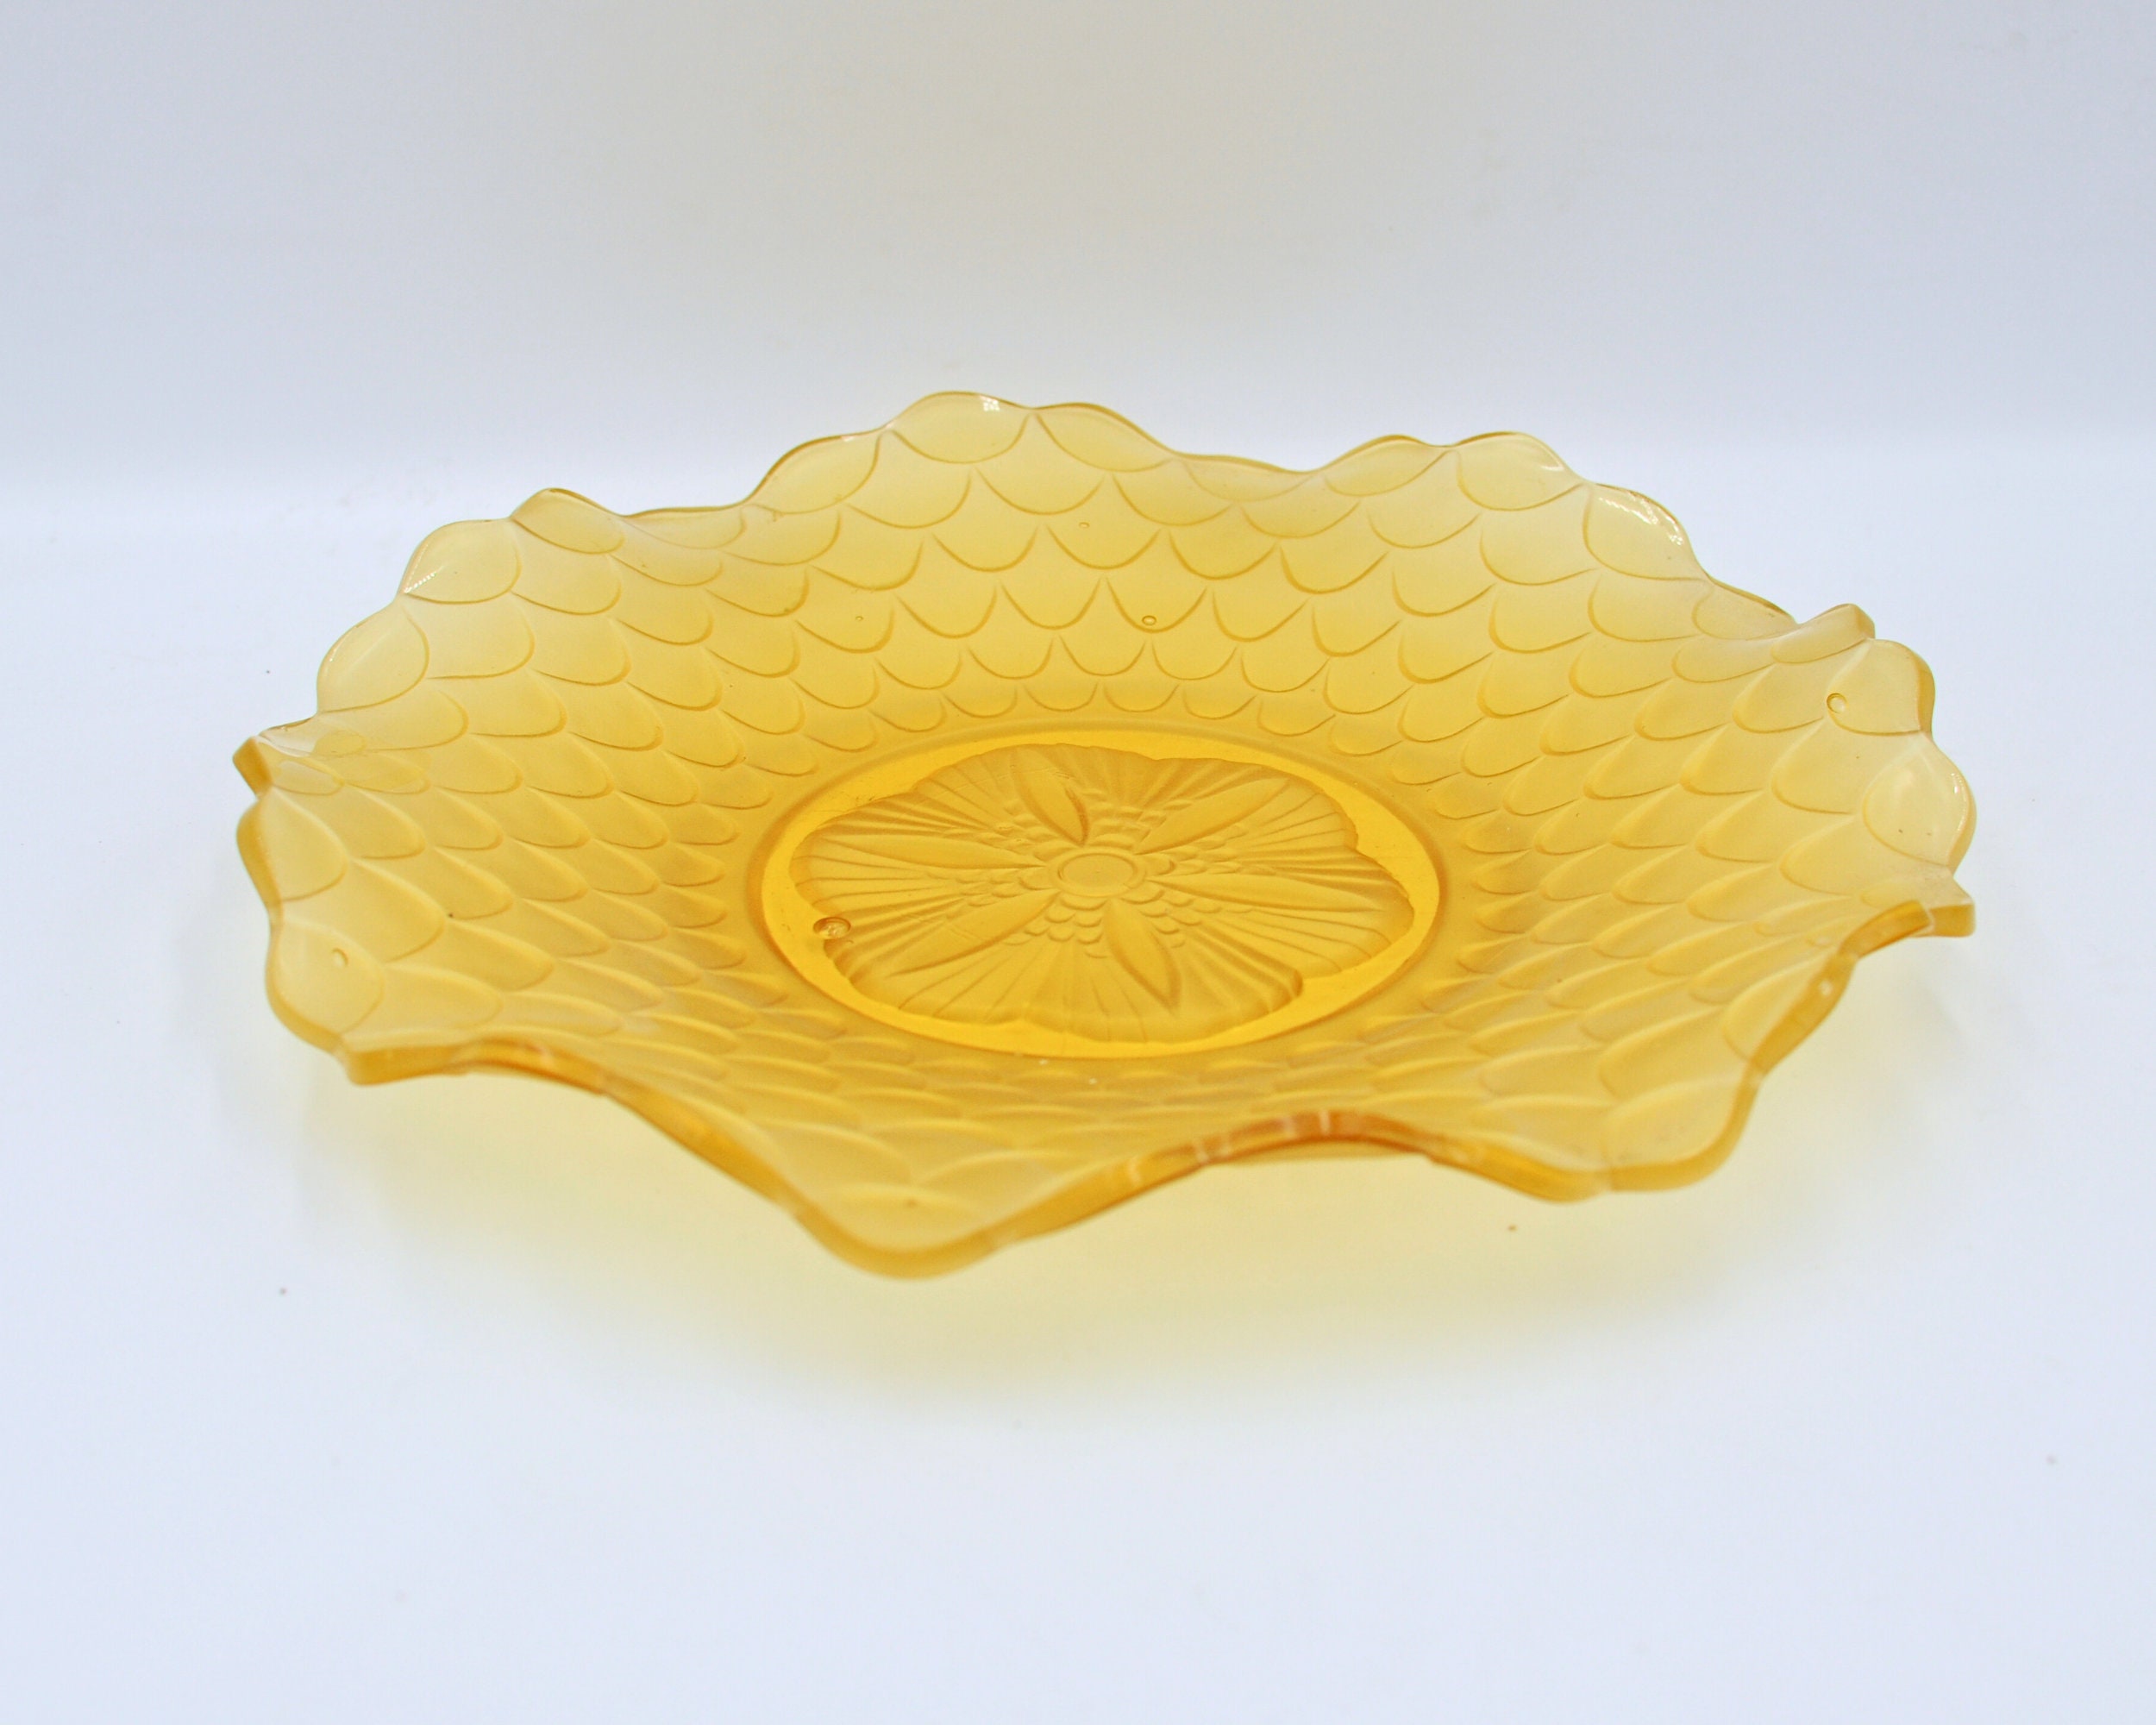 Oval Rolling Tray Resin Mold, Ocean Style Fish Scale Jewelry Storage Box,  Fruit Dish Silicone, Candle Holder,handmade Casting Craft Supplies 